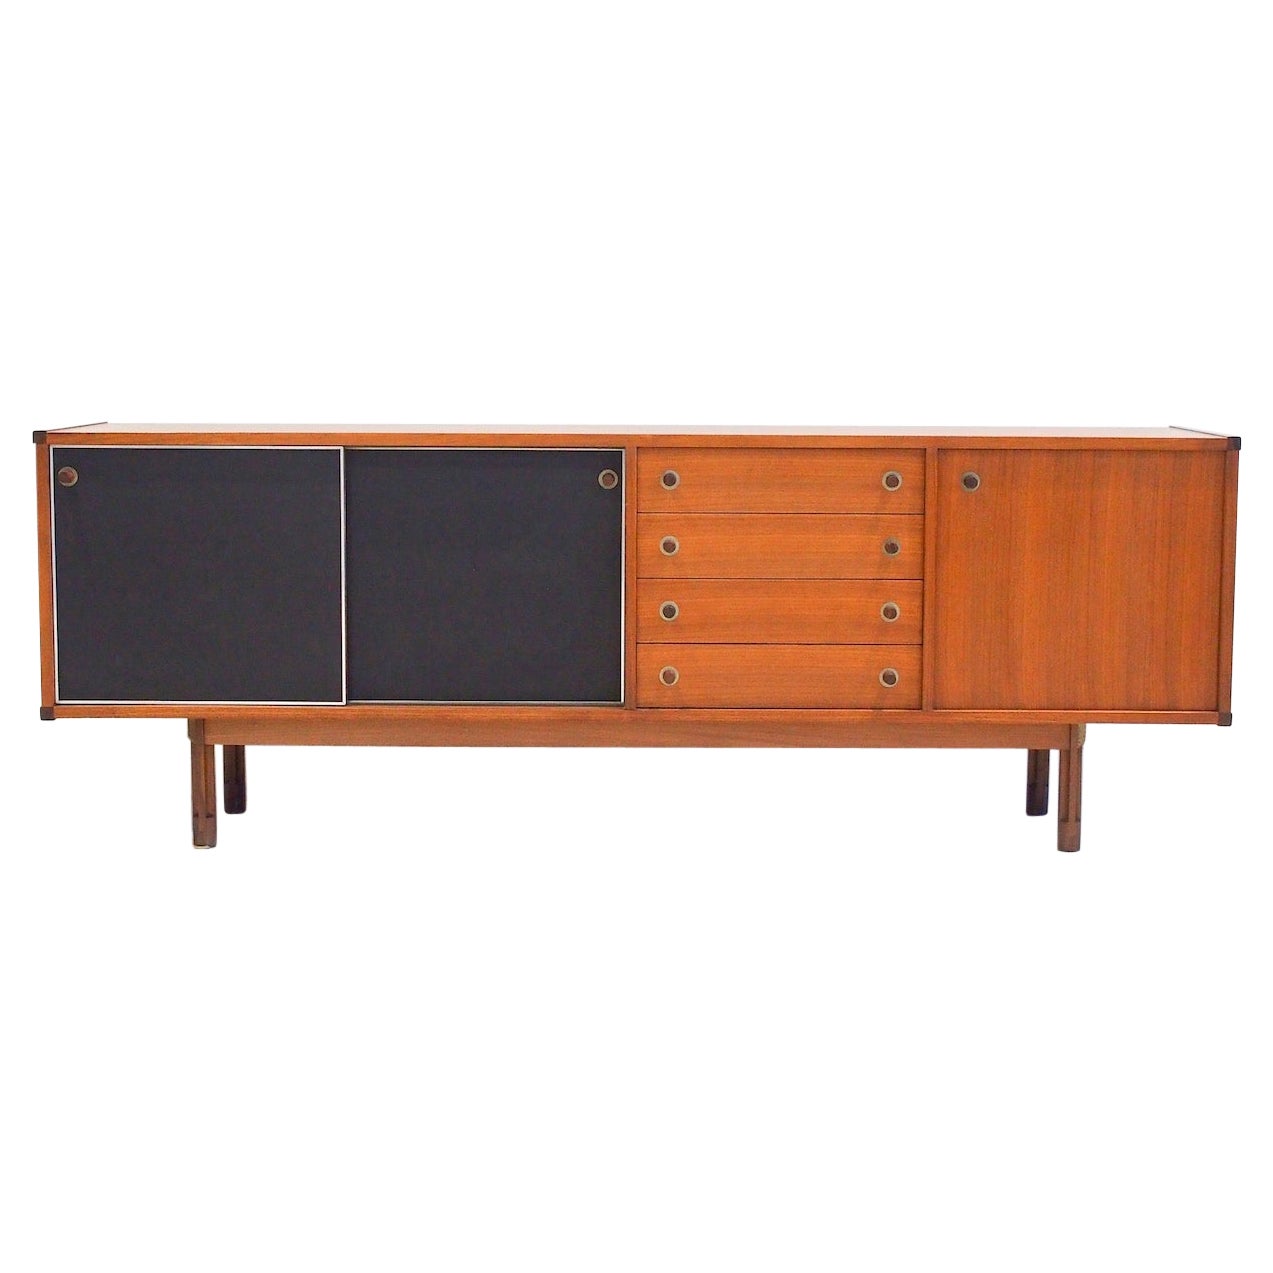 Wooden Sideboard with Black Doors by George Coslin For Sale